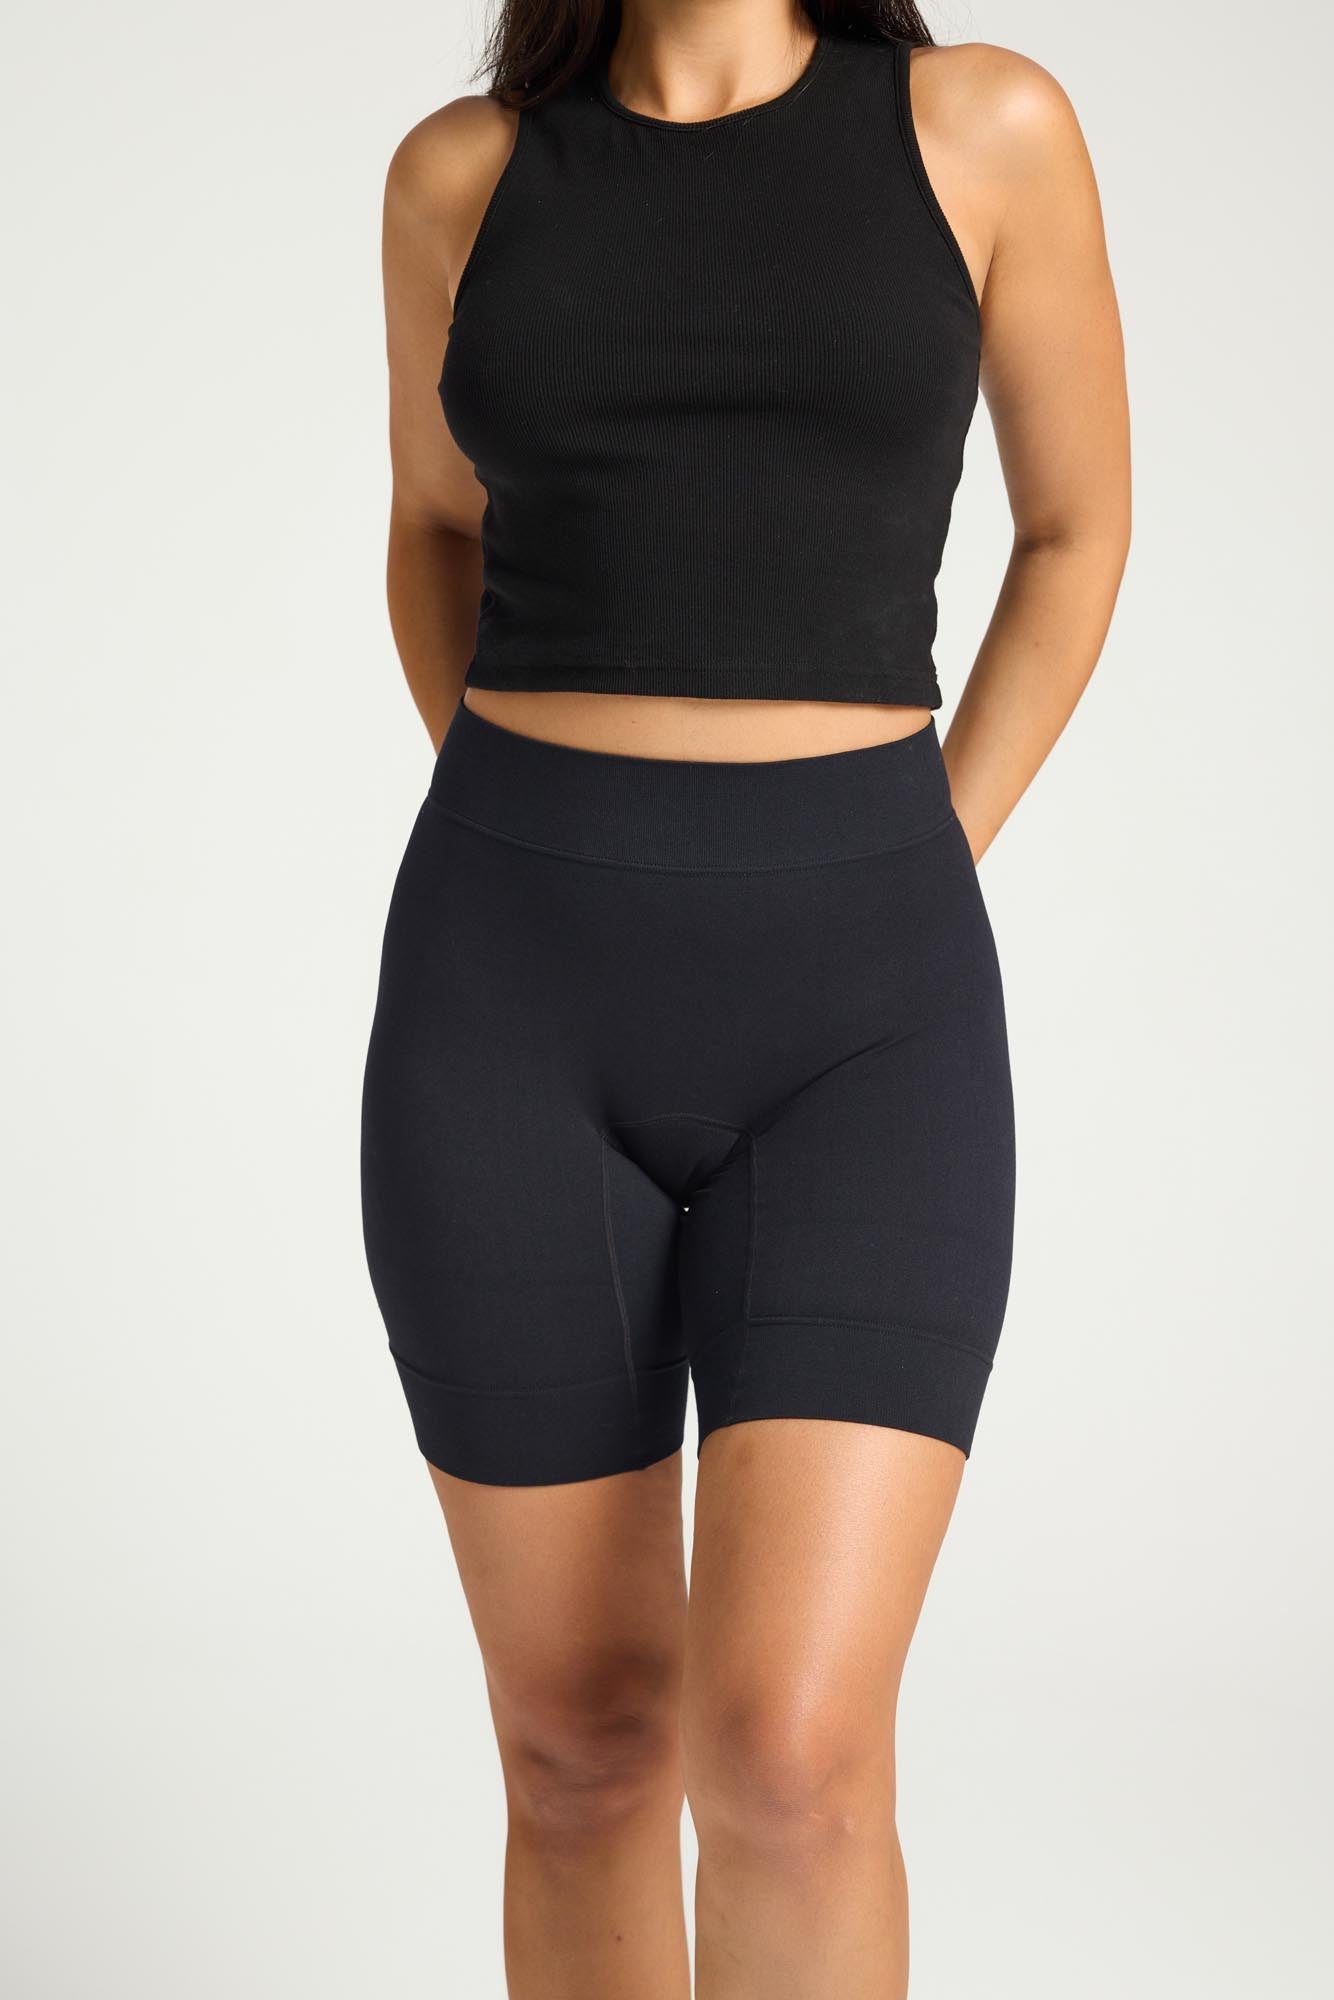 Knicked - Our Sleep Shorts are super heavy absorbency and are